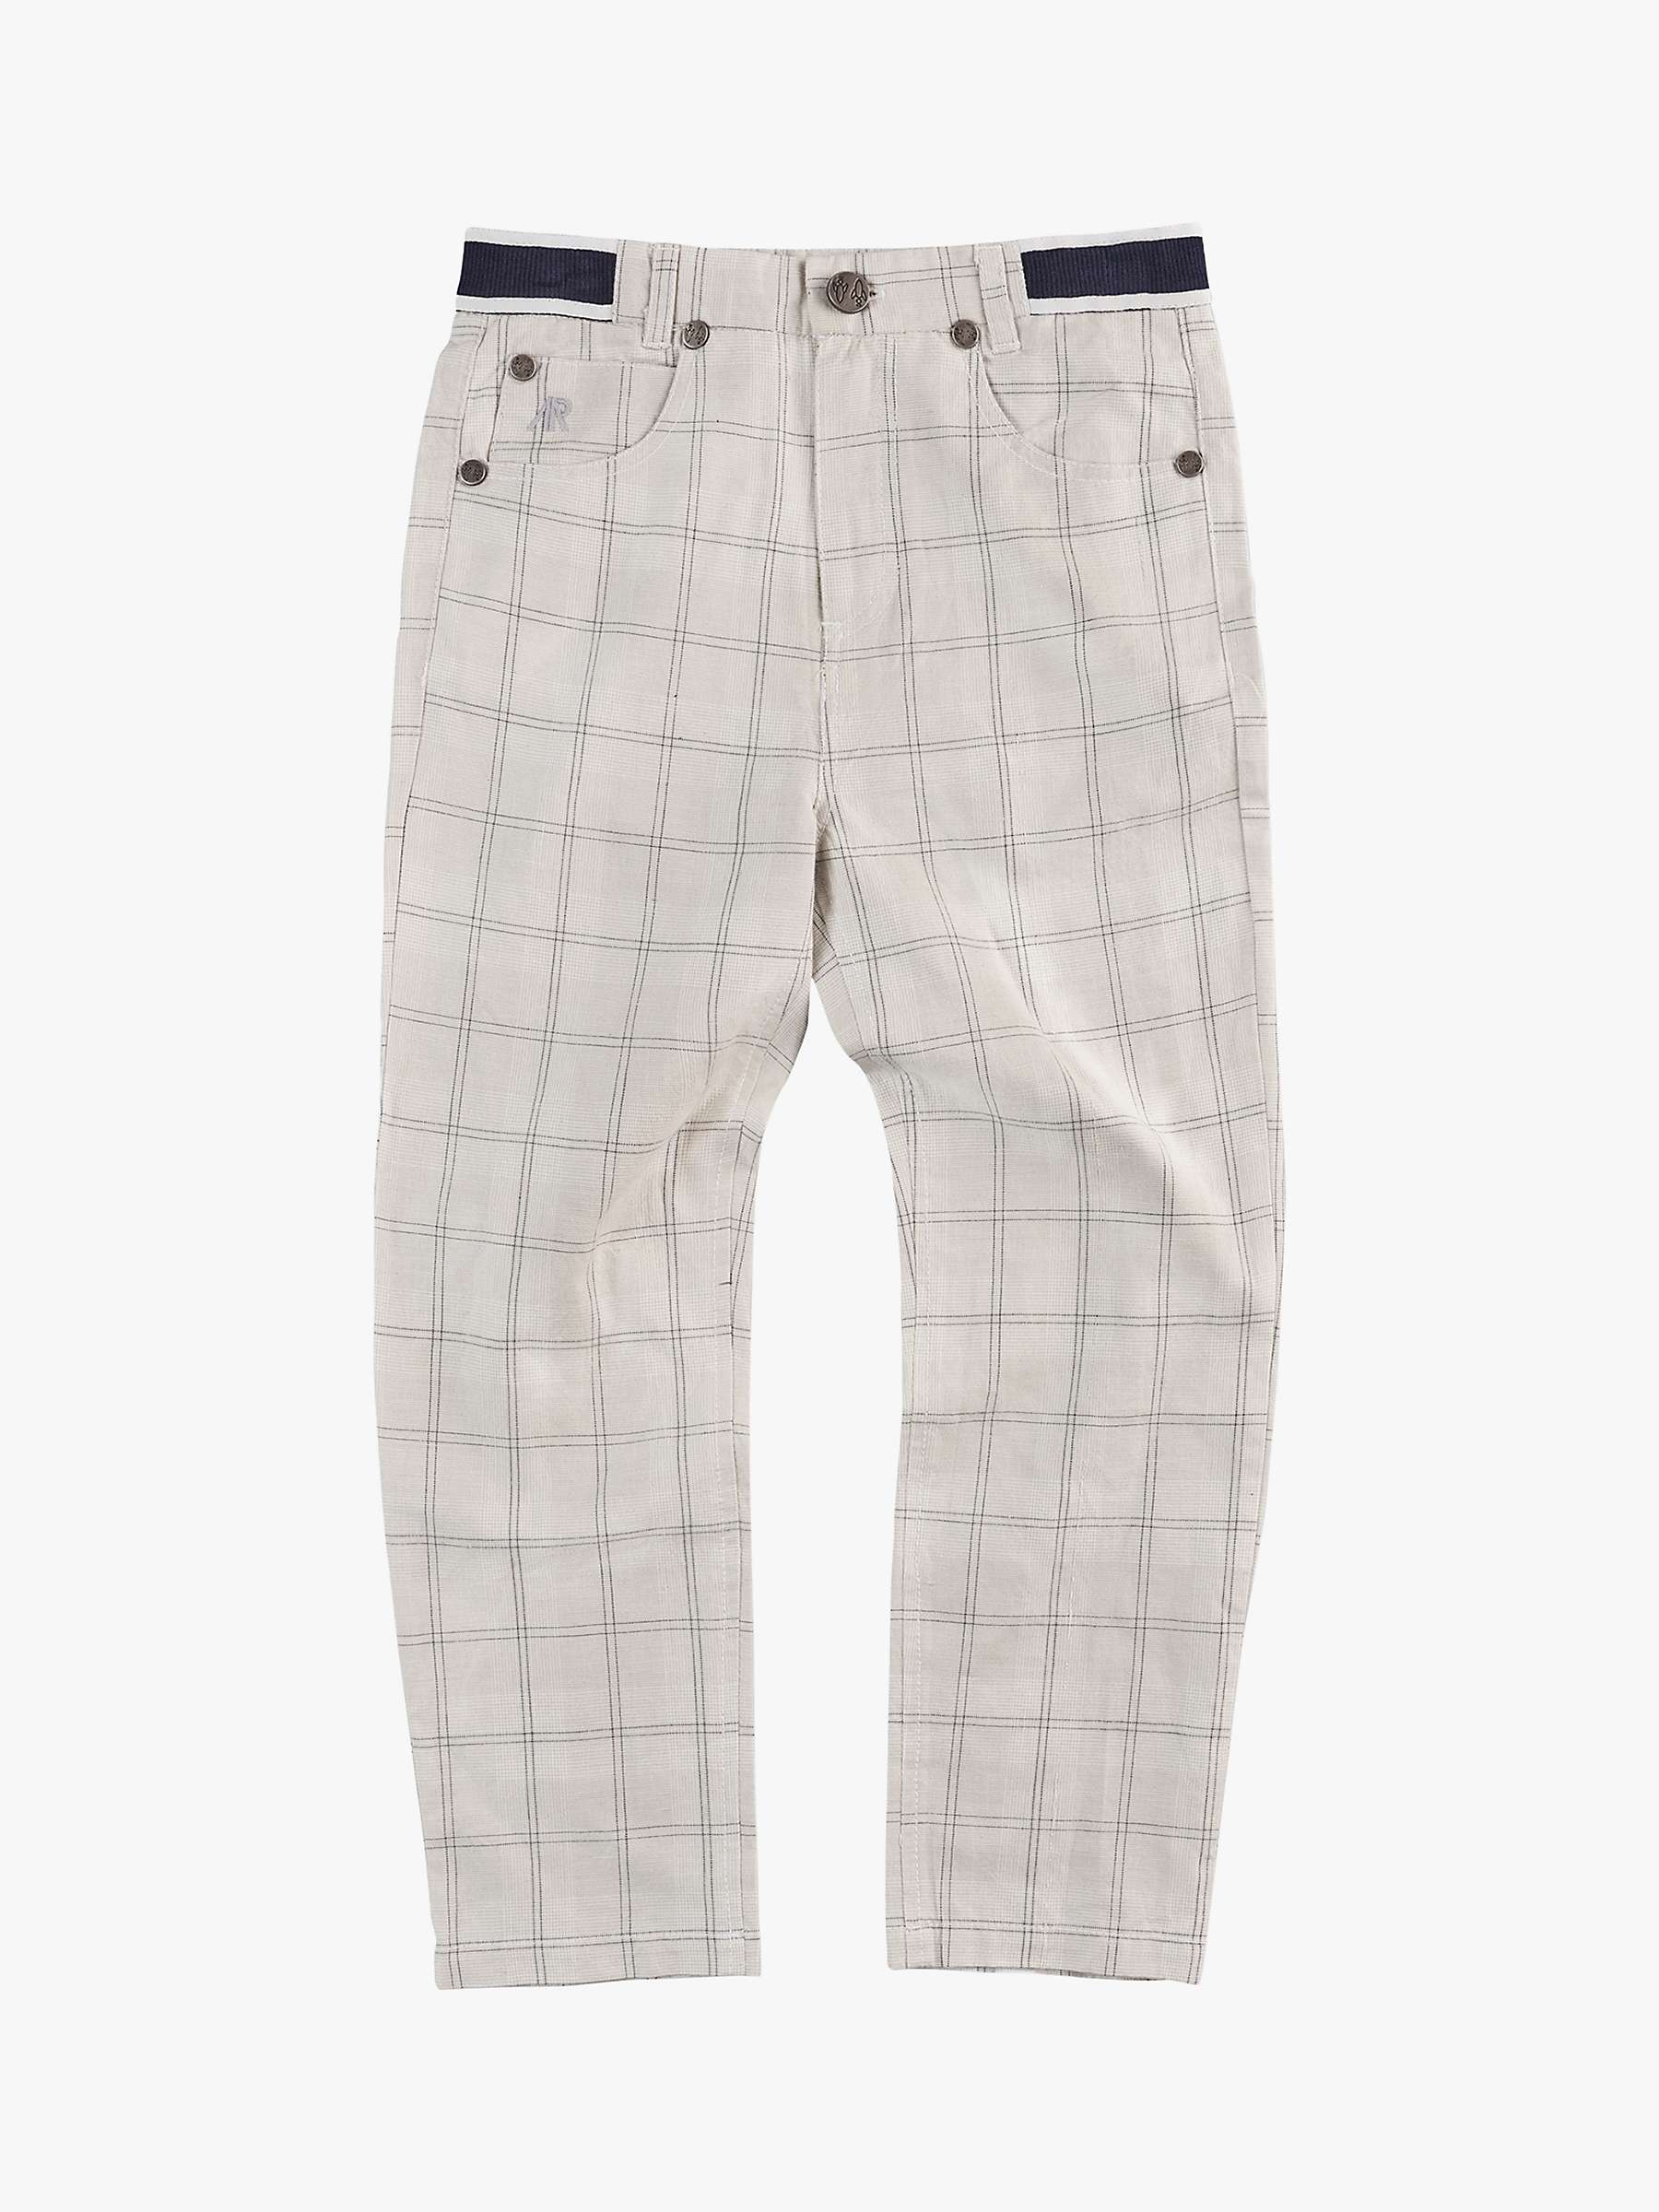 Buy Angel & Rocket Kids' Emerson Check Trousers, Grey Online at johnlewis.com